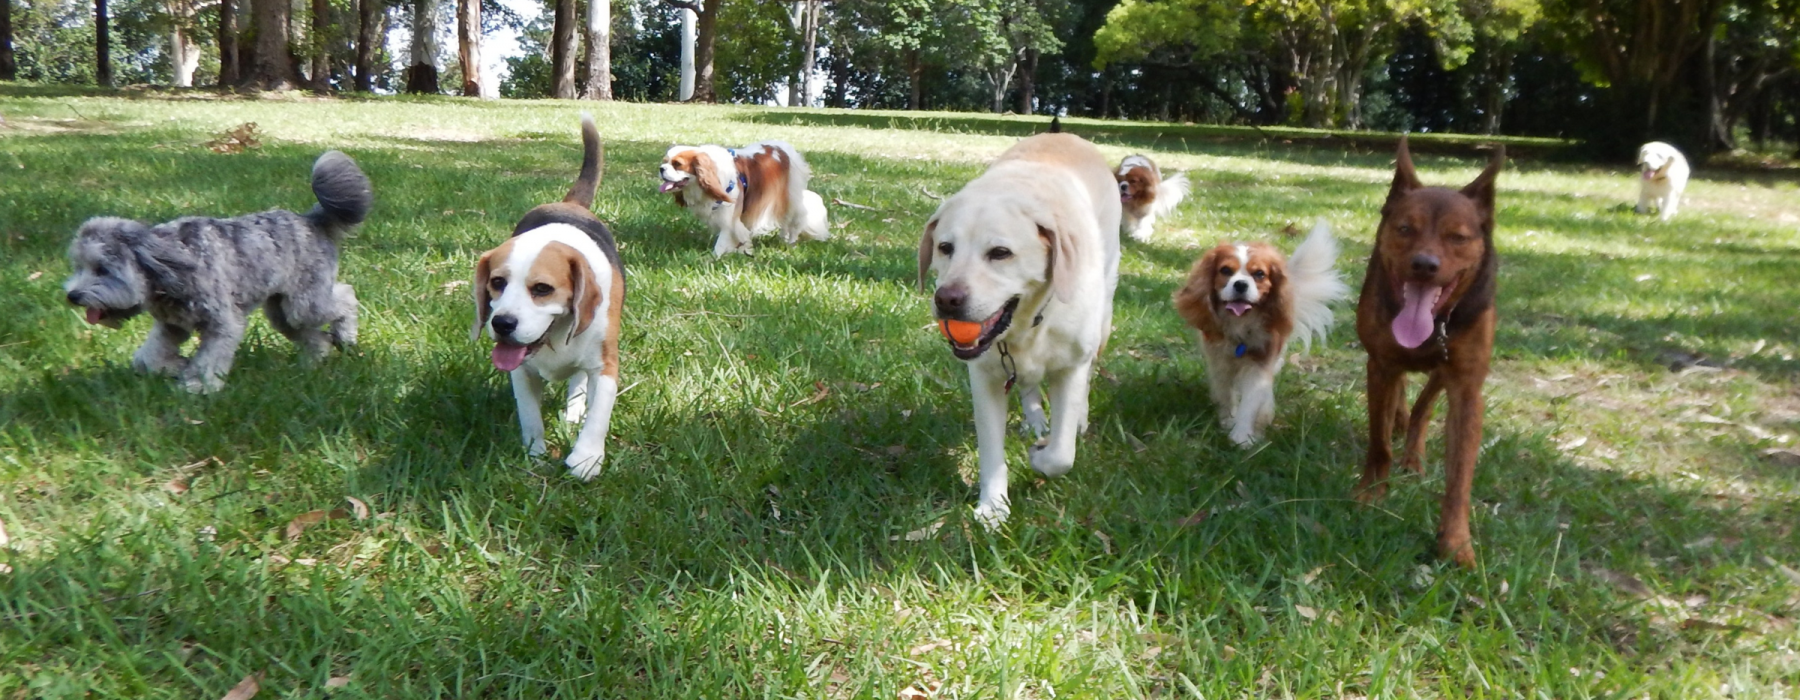 Best Dog Parks in Dallas